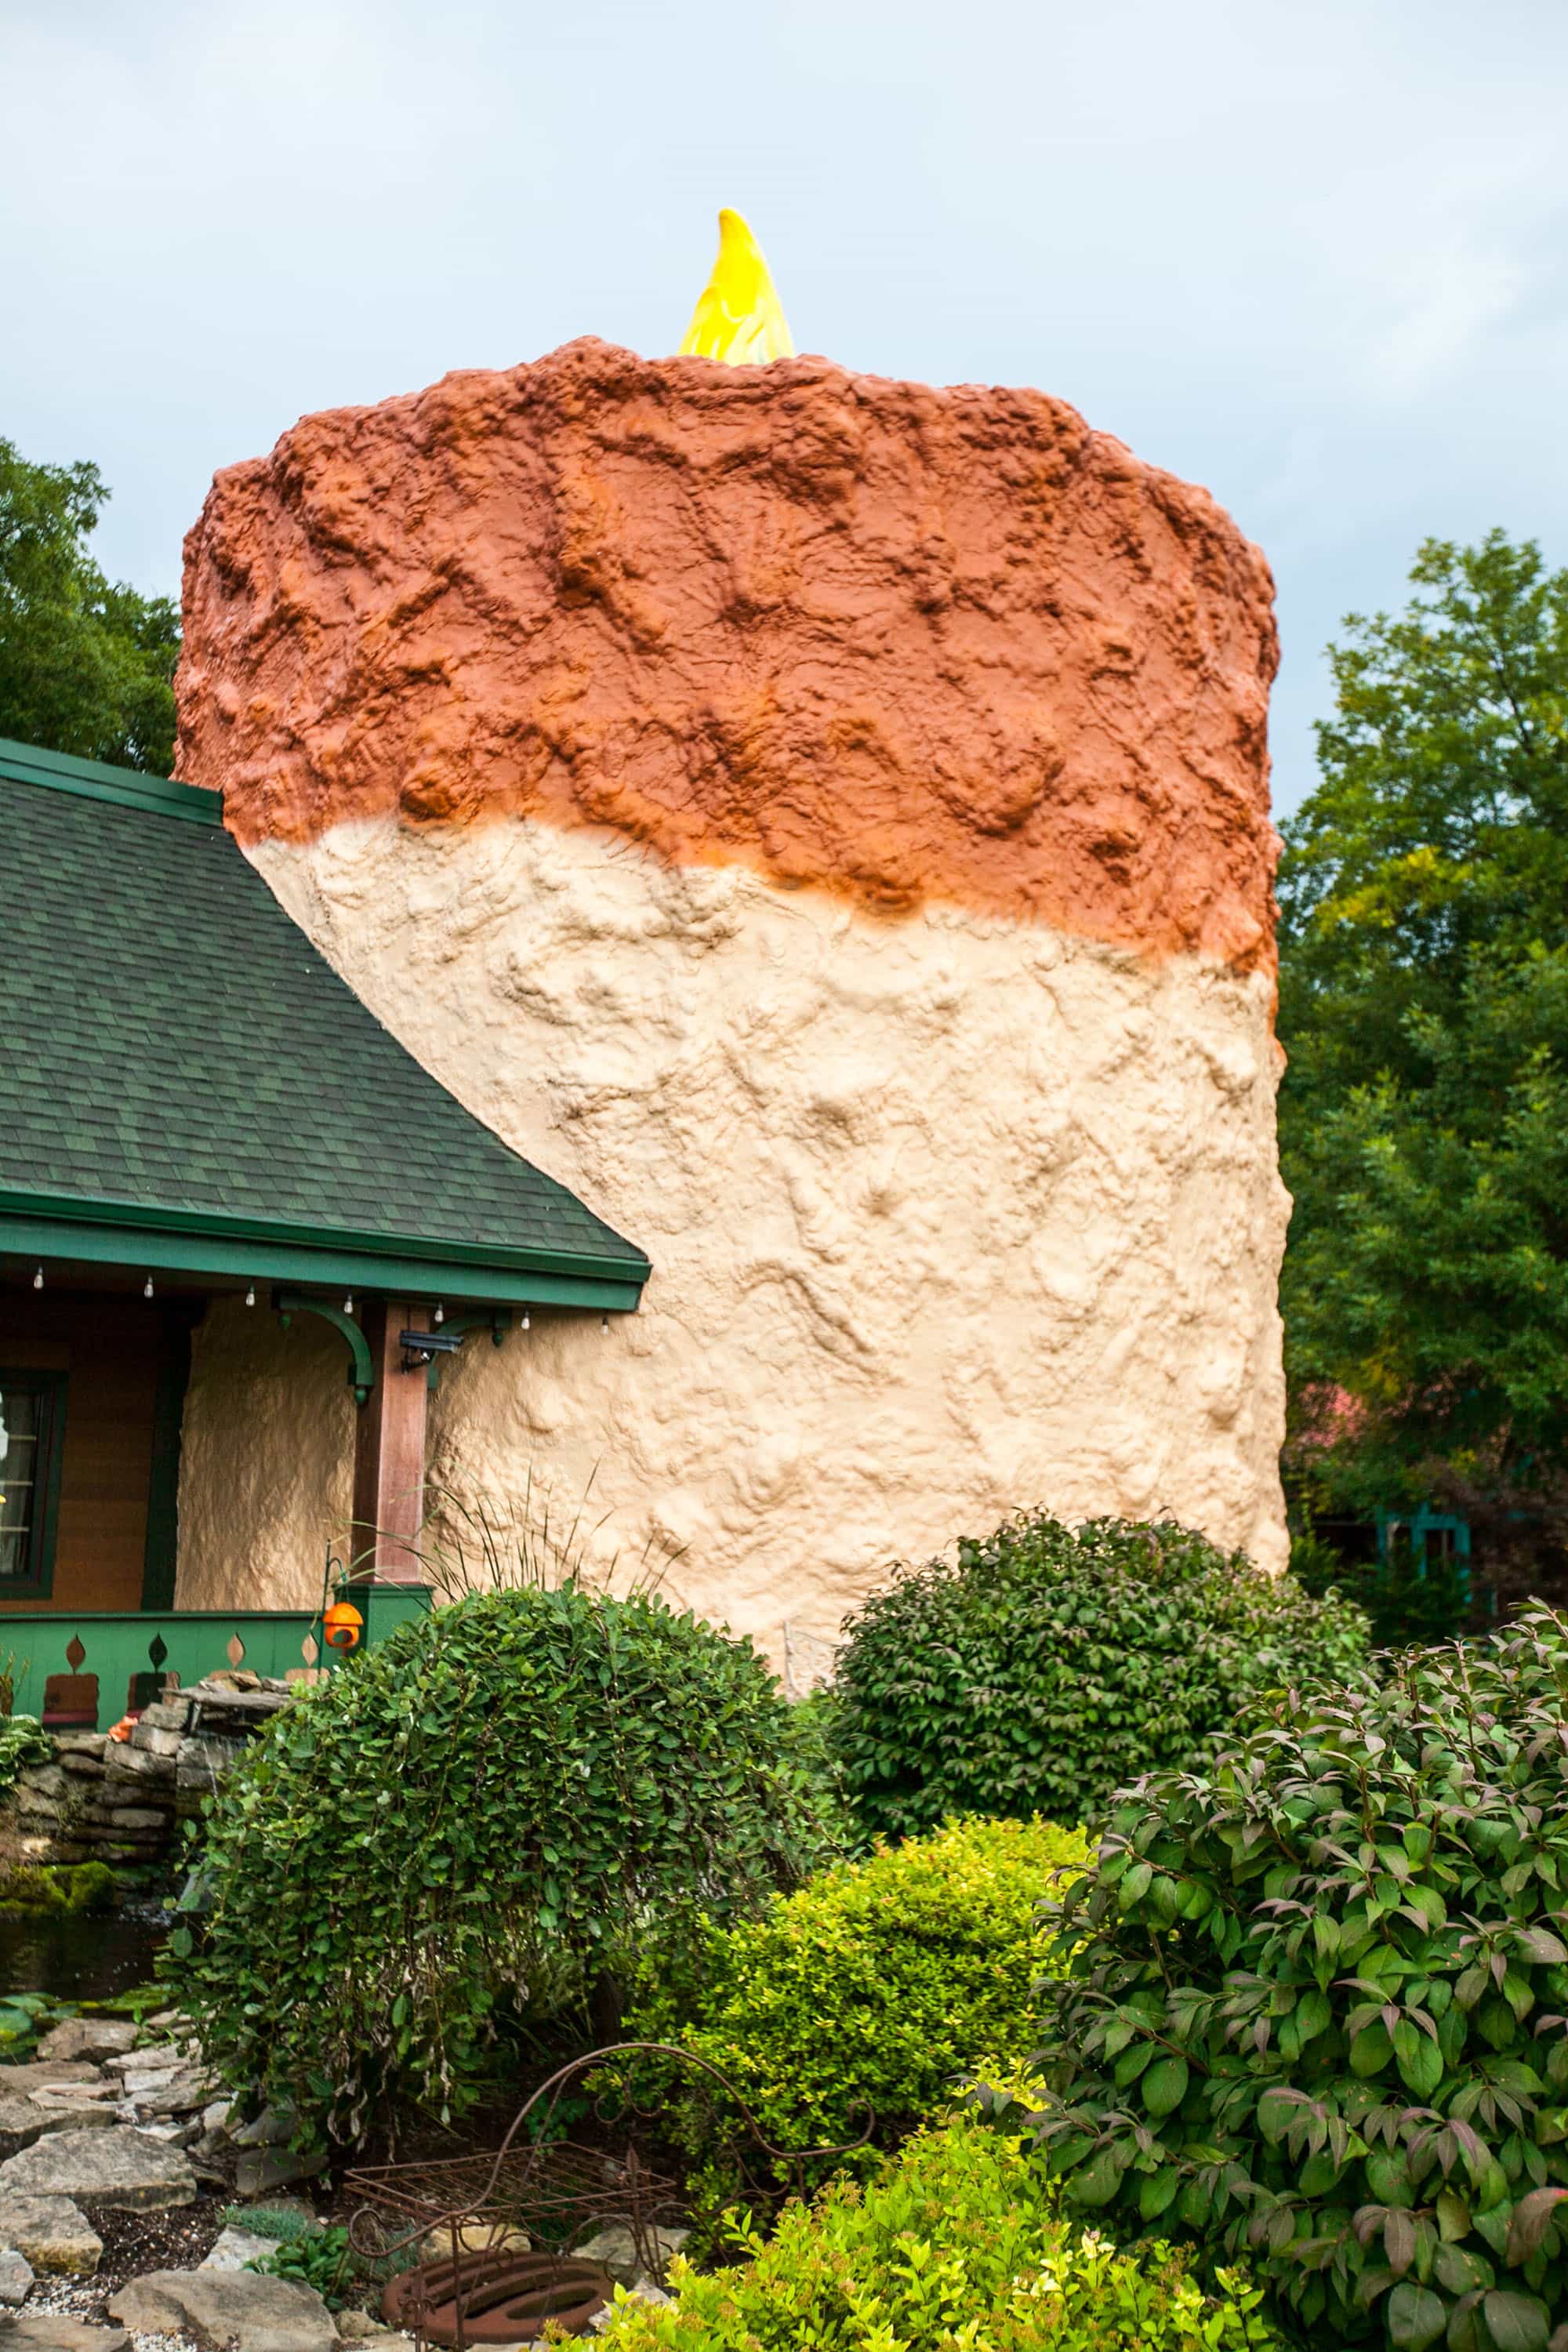 World’s Largest Candle in Centerville, Indiana